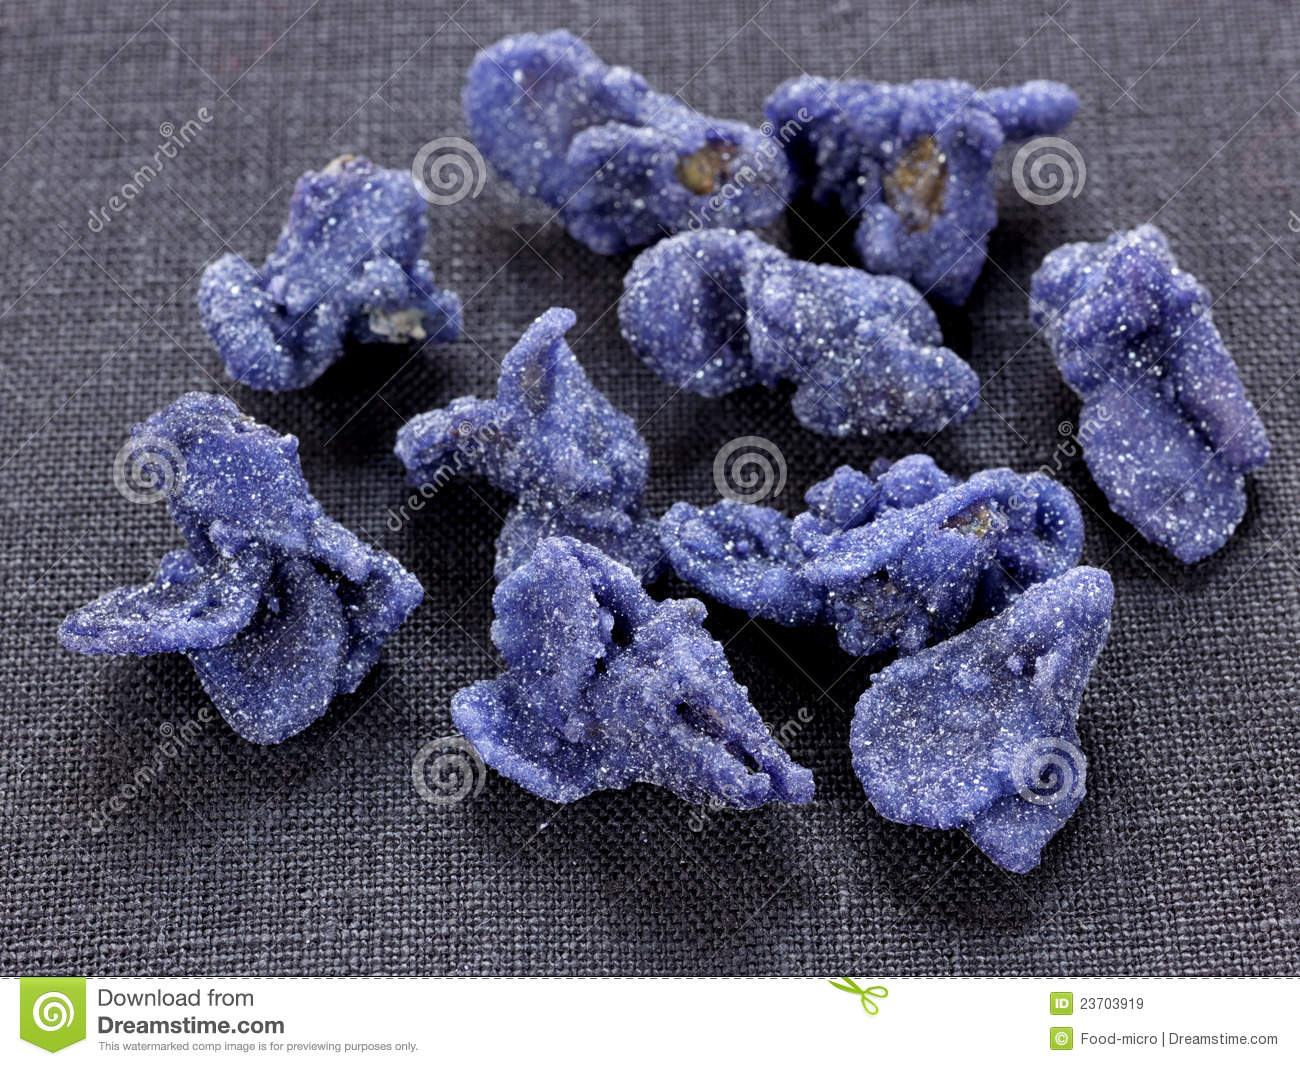 Crystallized Violets Royalty Free Stock Images   Image  23703919